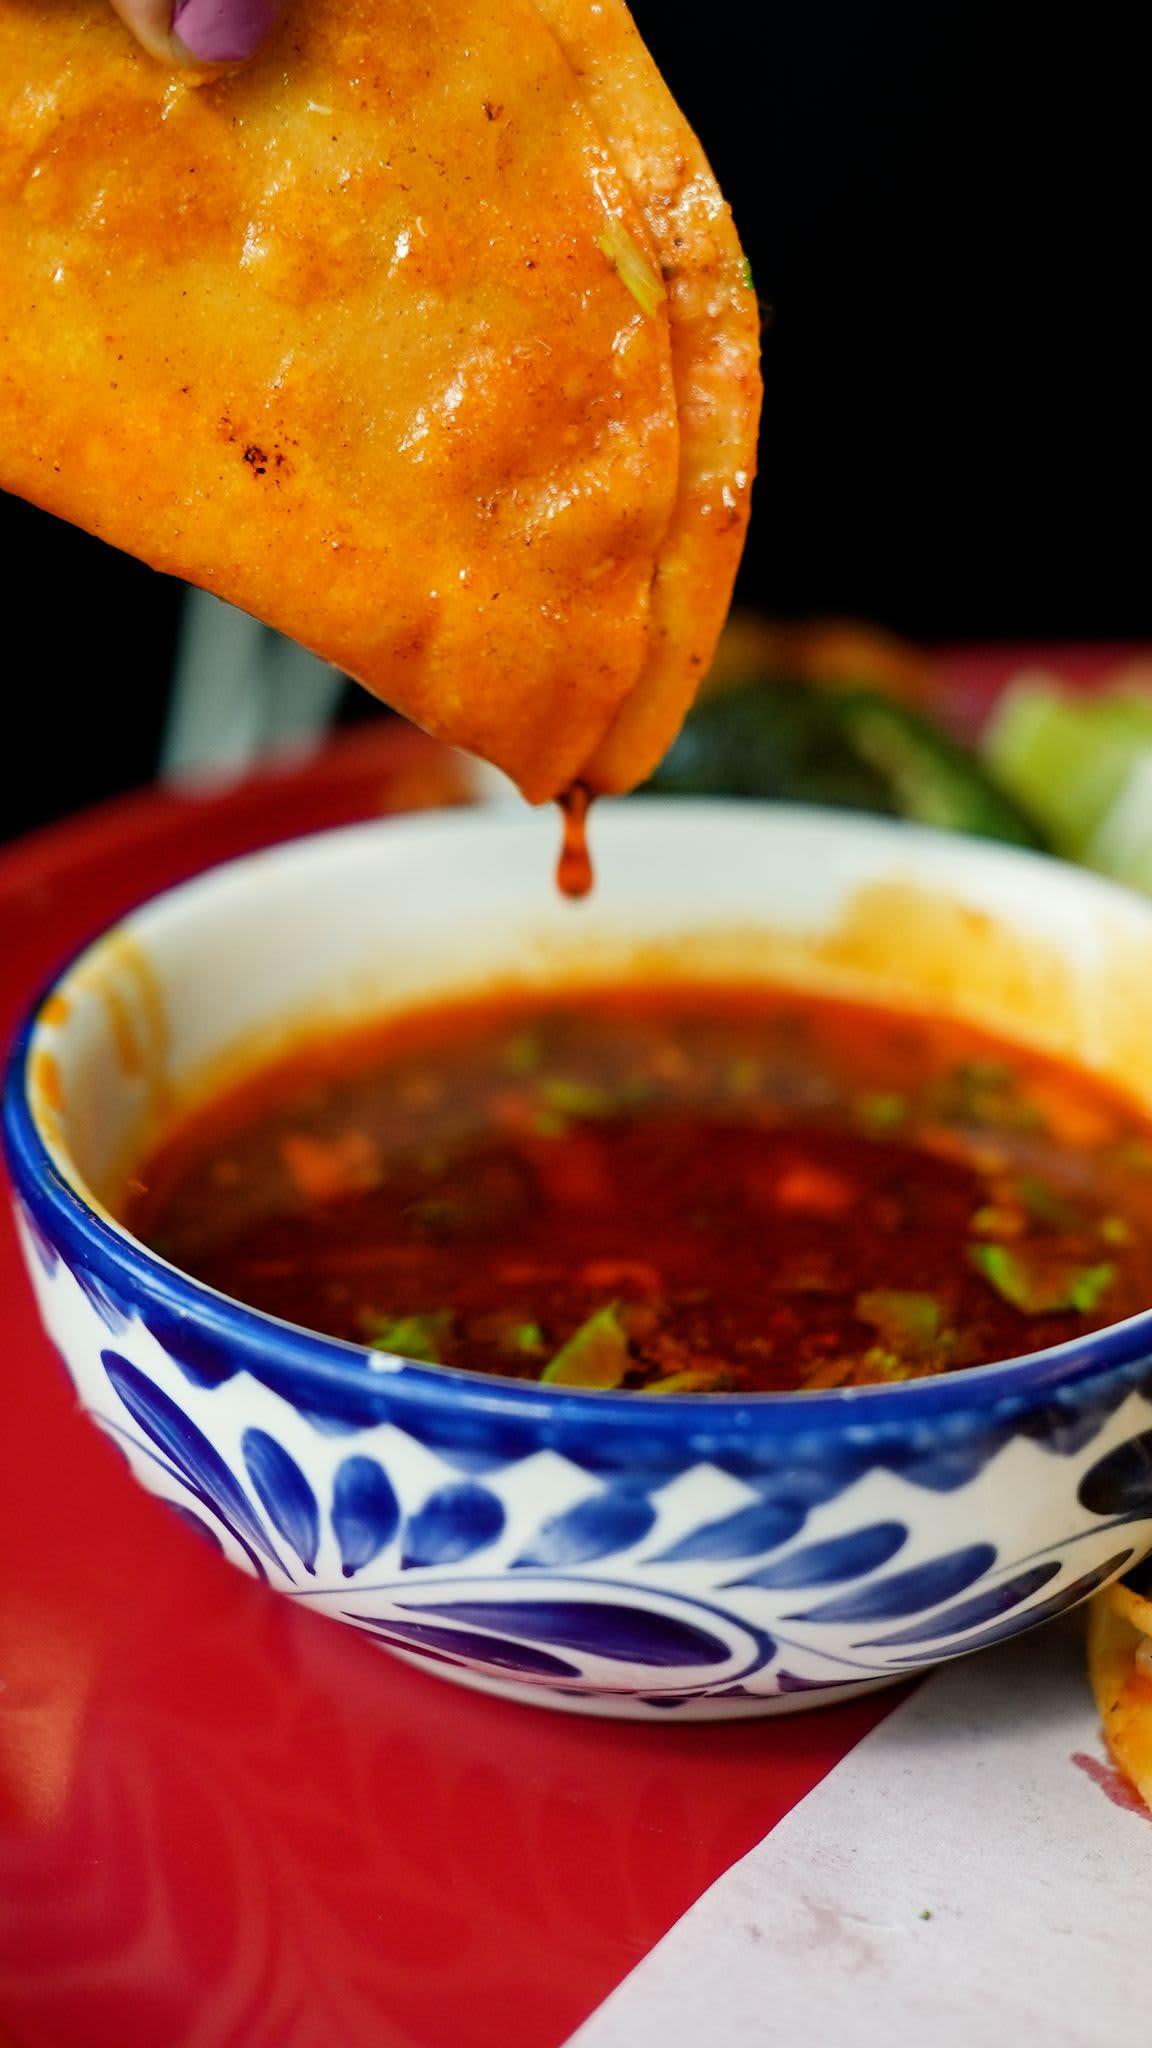 Dip into some Birria and brighten your winter! 